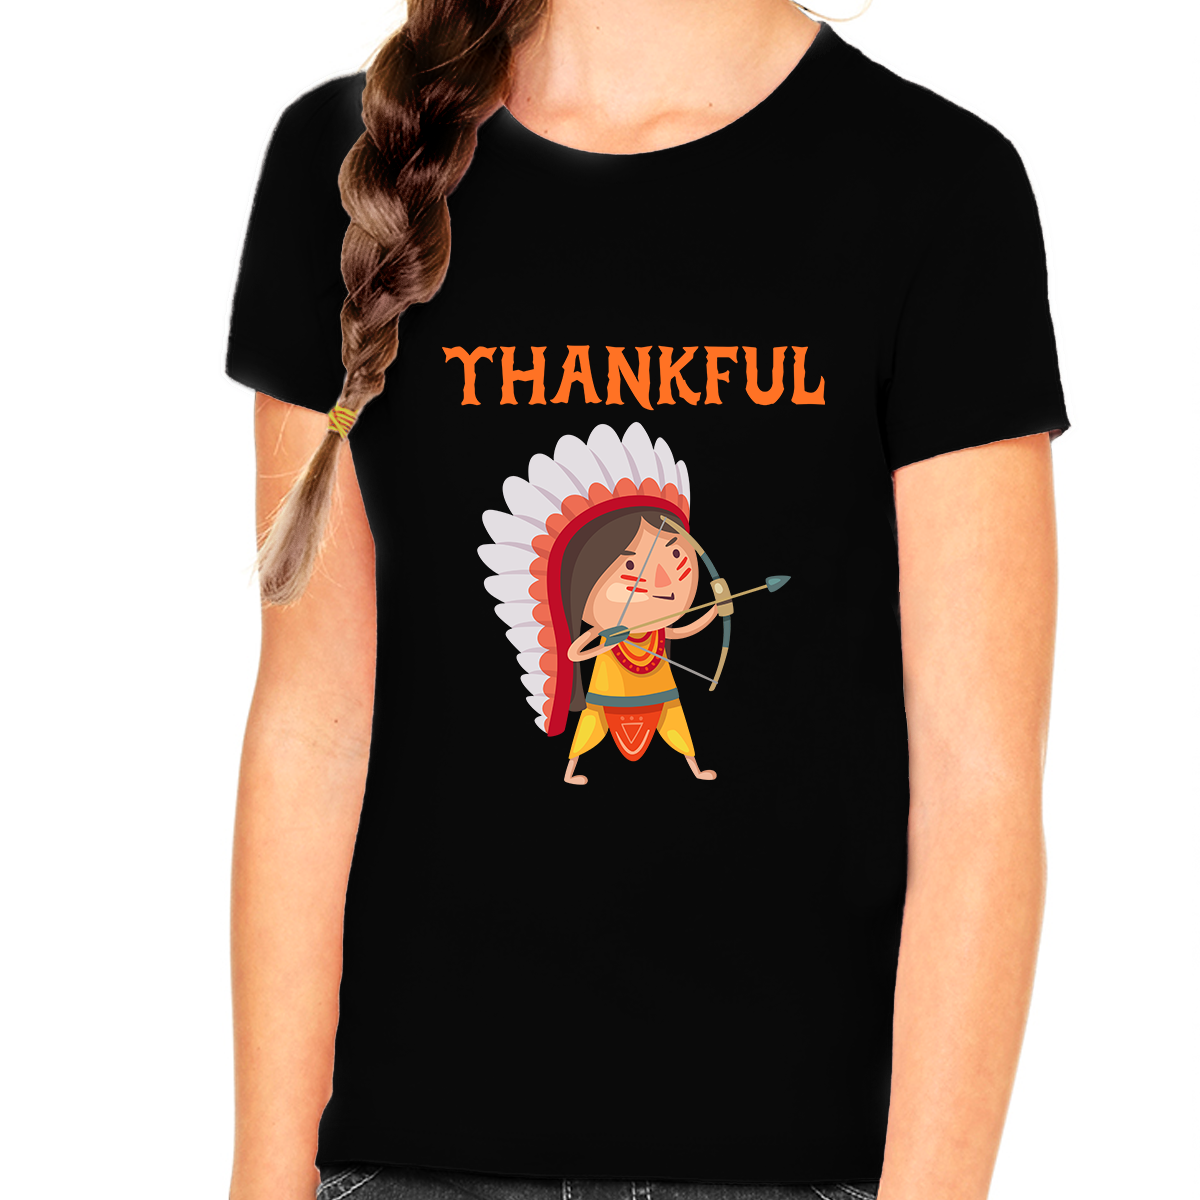 Funny Thanksgiving Shirts for Girls Thanksgiving Outfit Thanksgiving Shirts for Kids Indian Shirts for Kids